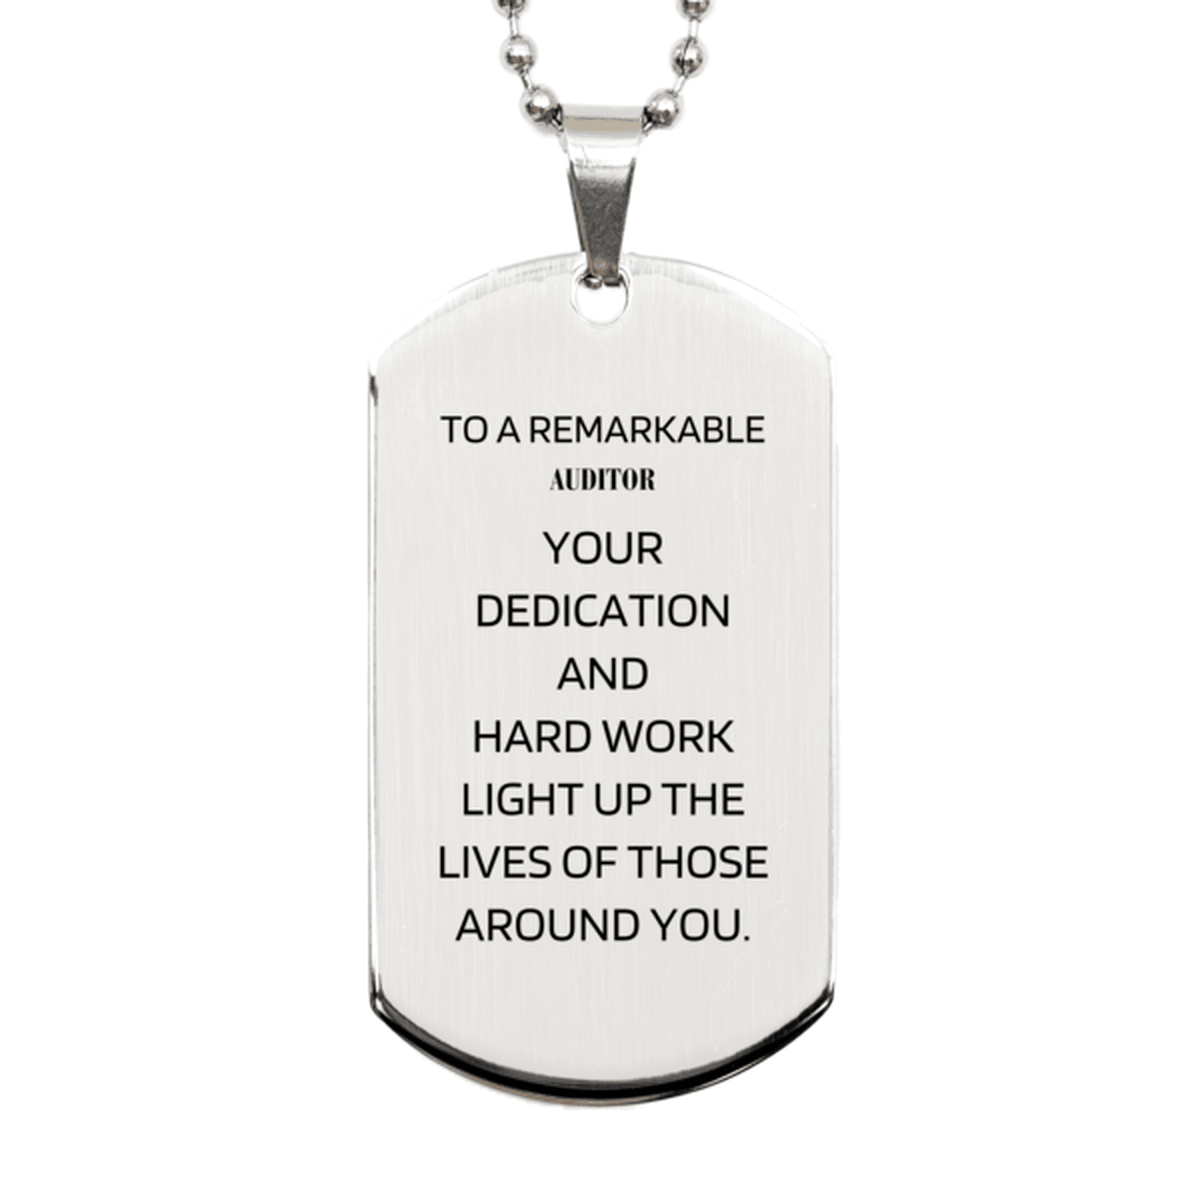 Remarkable Auditor Gifts, Your dedication and hard work, Inspirational Birthday Christmas Unique Silver Dog Tag For Auditor, Coworkers, Men, Women, Friends - Mallard Moon Gift Shop